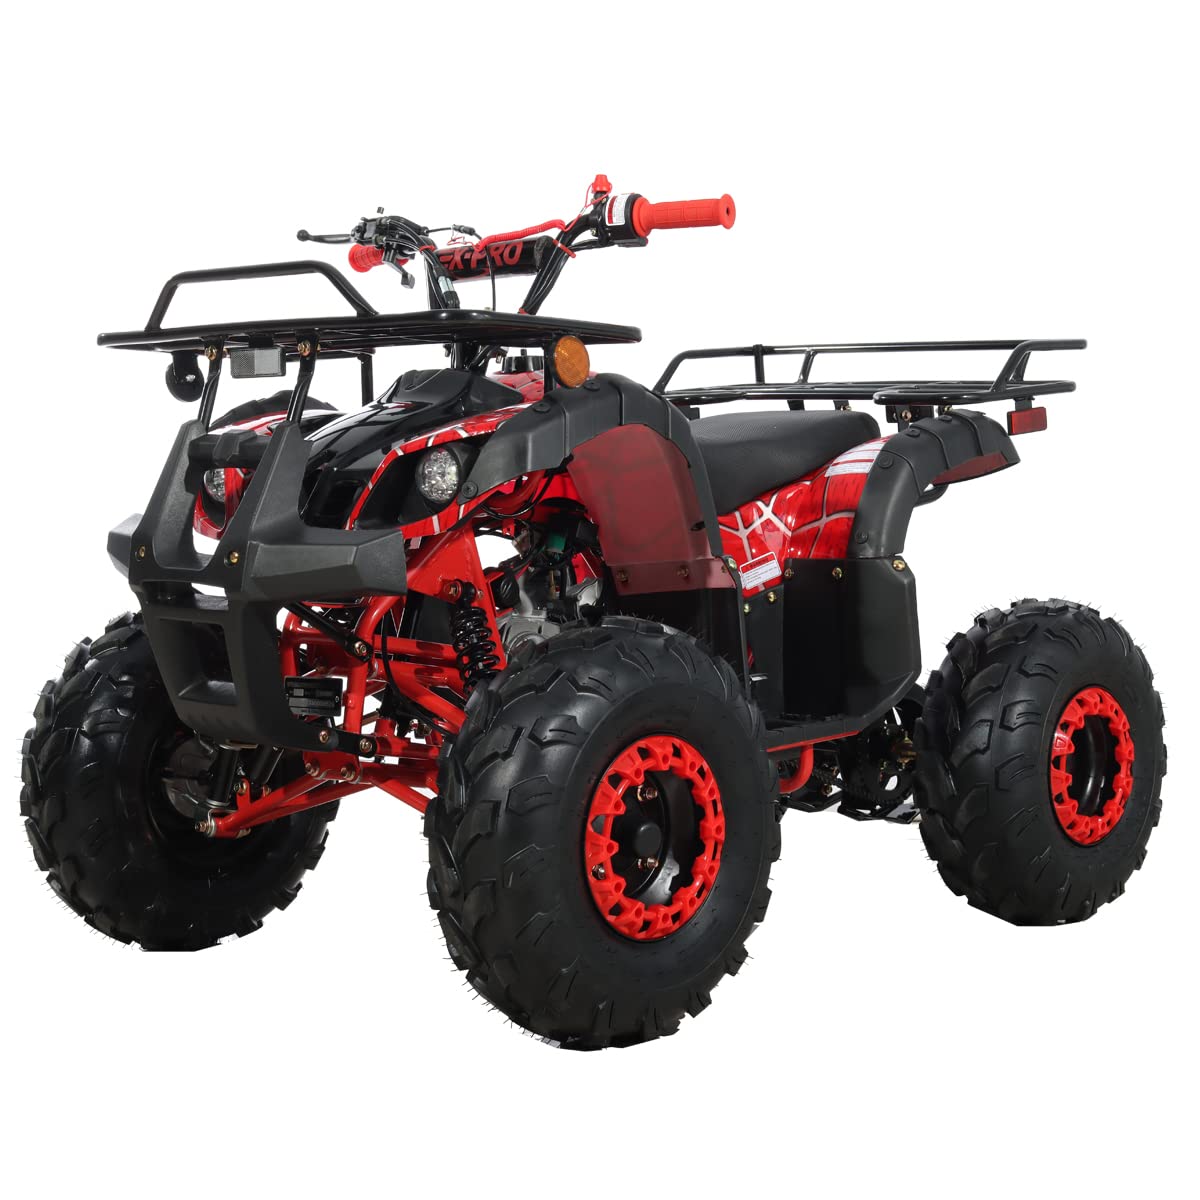 X-PRO 125cc ATV 4 Wheels Quad 125 ATV Quads with LED Lights, Big 19"/18" Tires! (Spider Red, Factory Package)